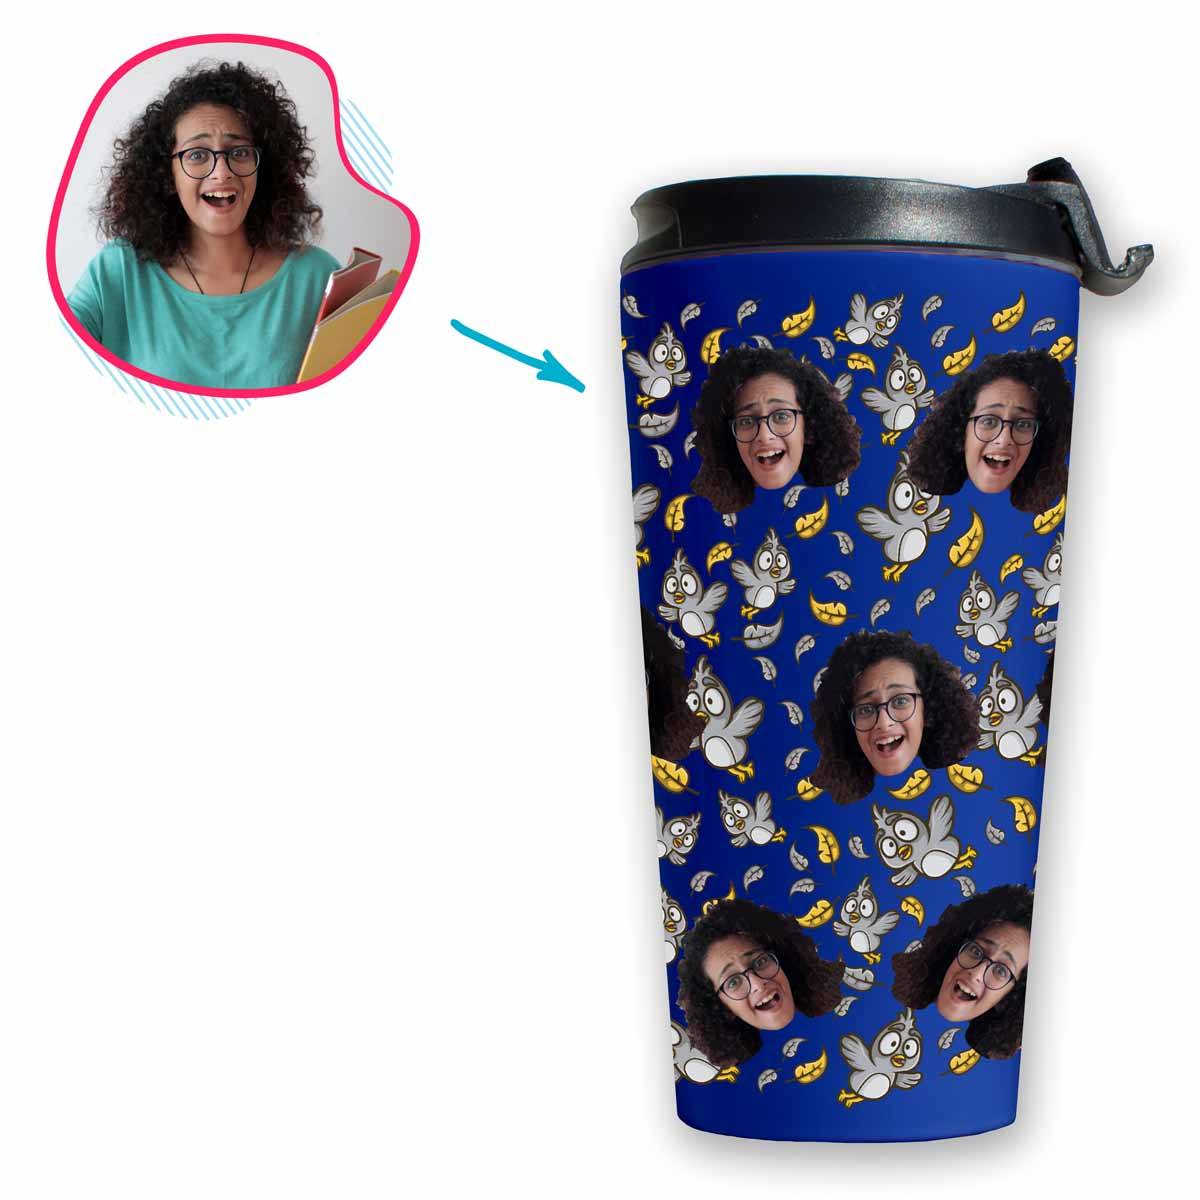 darkblue Bird travel mug personalized with photo of face printed on it